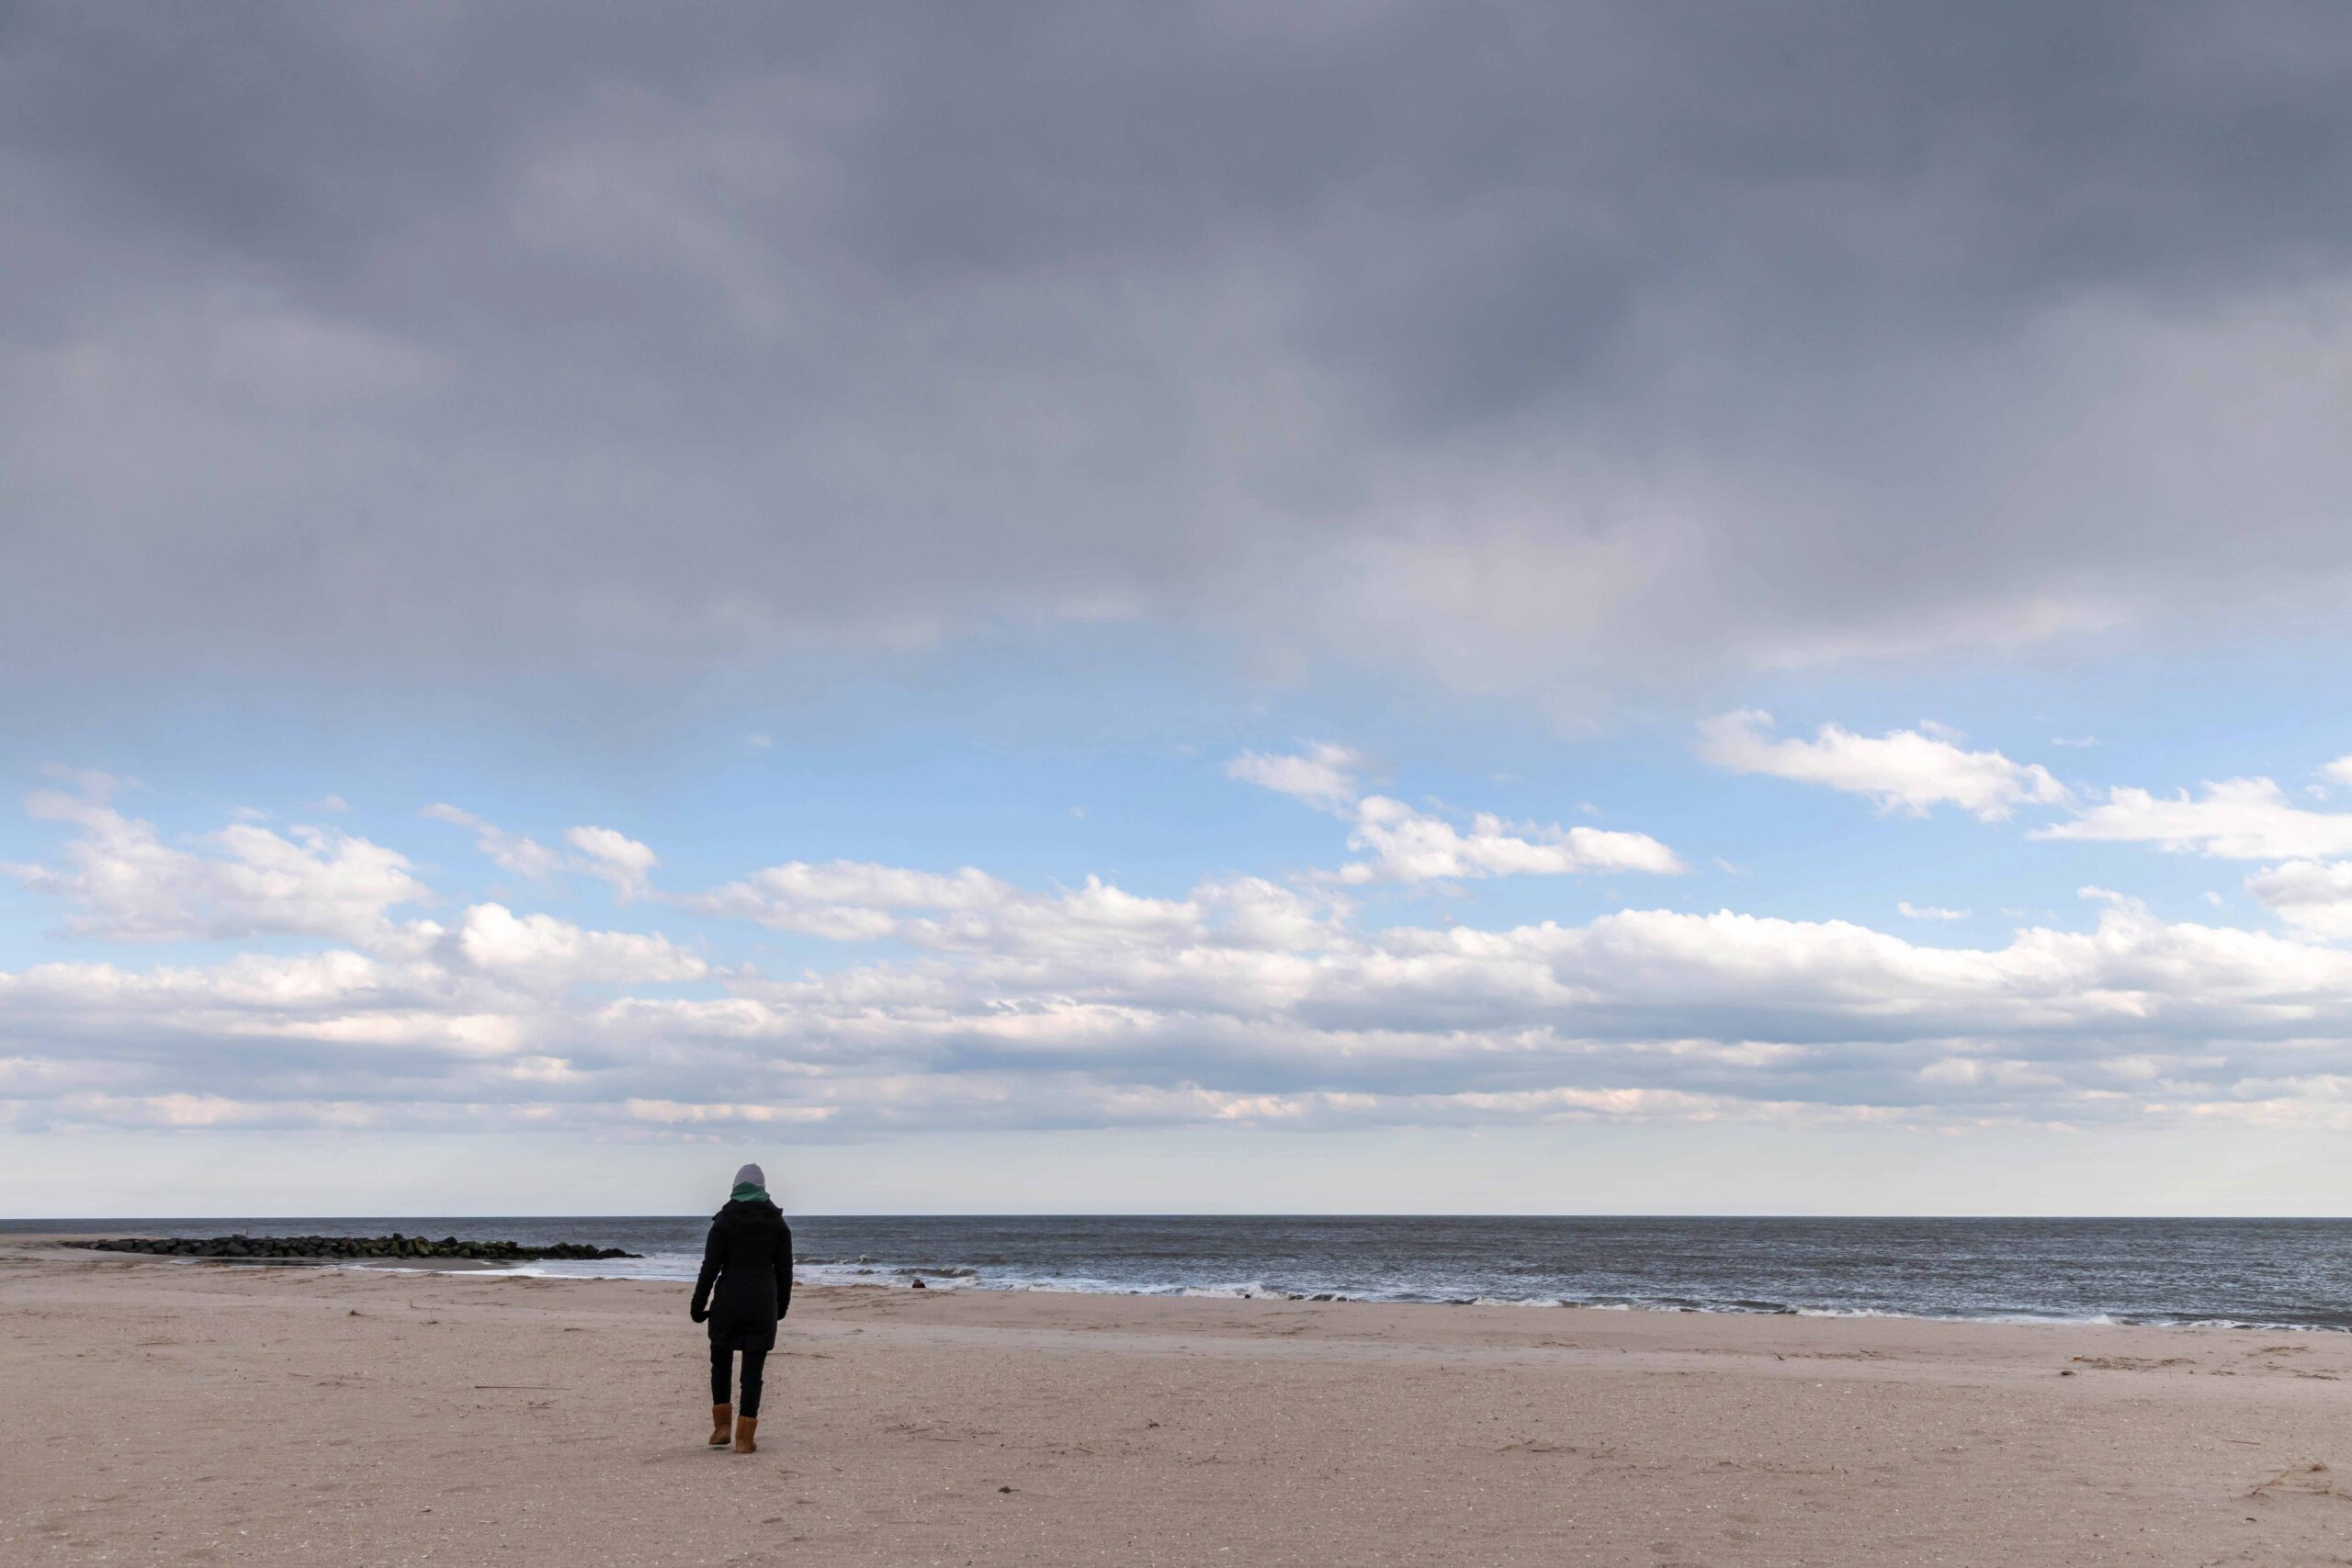 A person walking on the beach with dark puffy clouds and blue sky